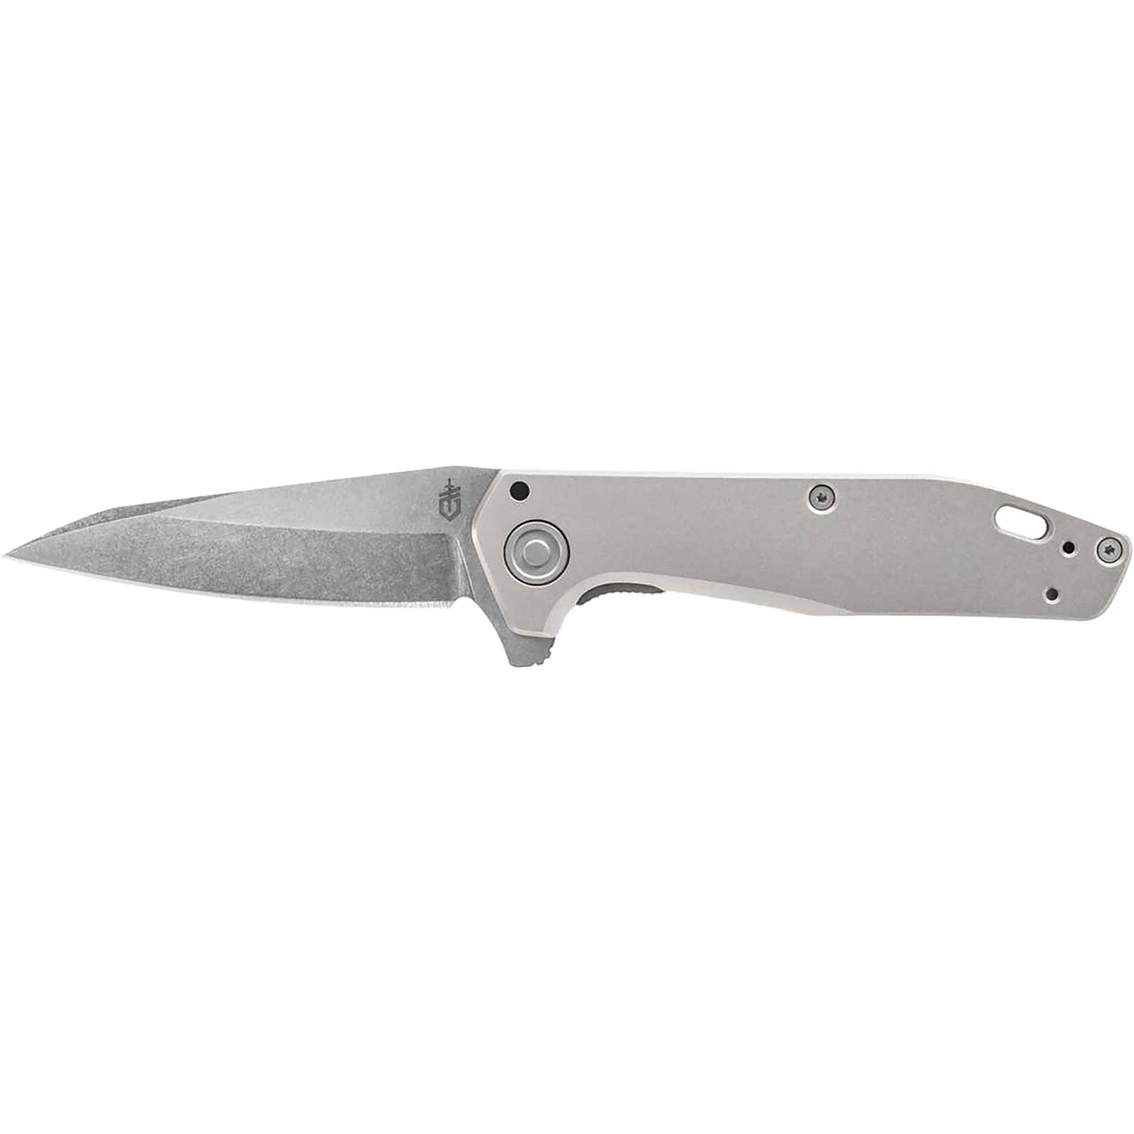 Gerber Knives and Tools Fastball, Grey FE Knife - Image 1 of 4